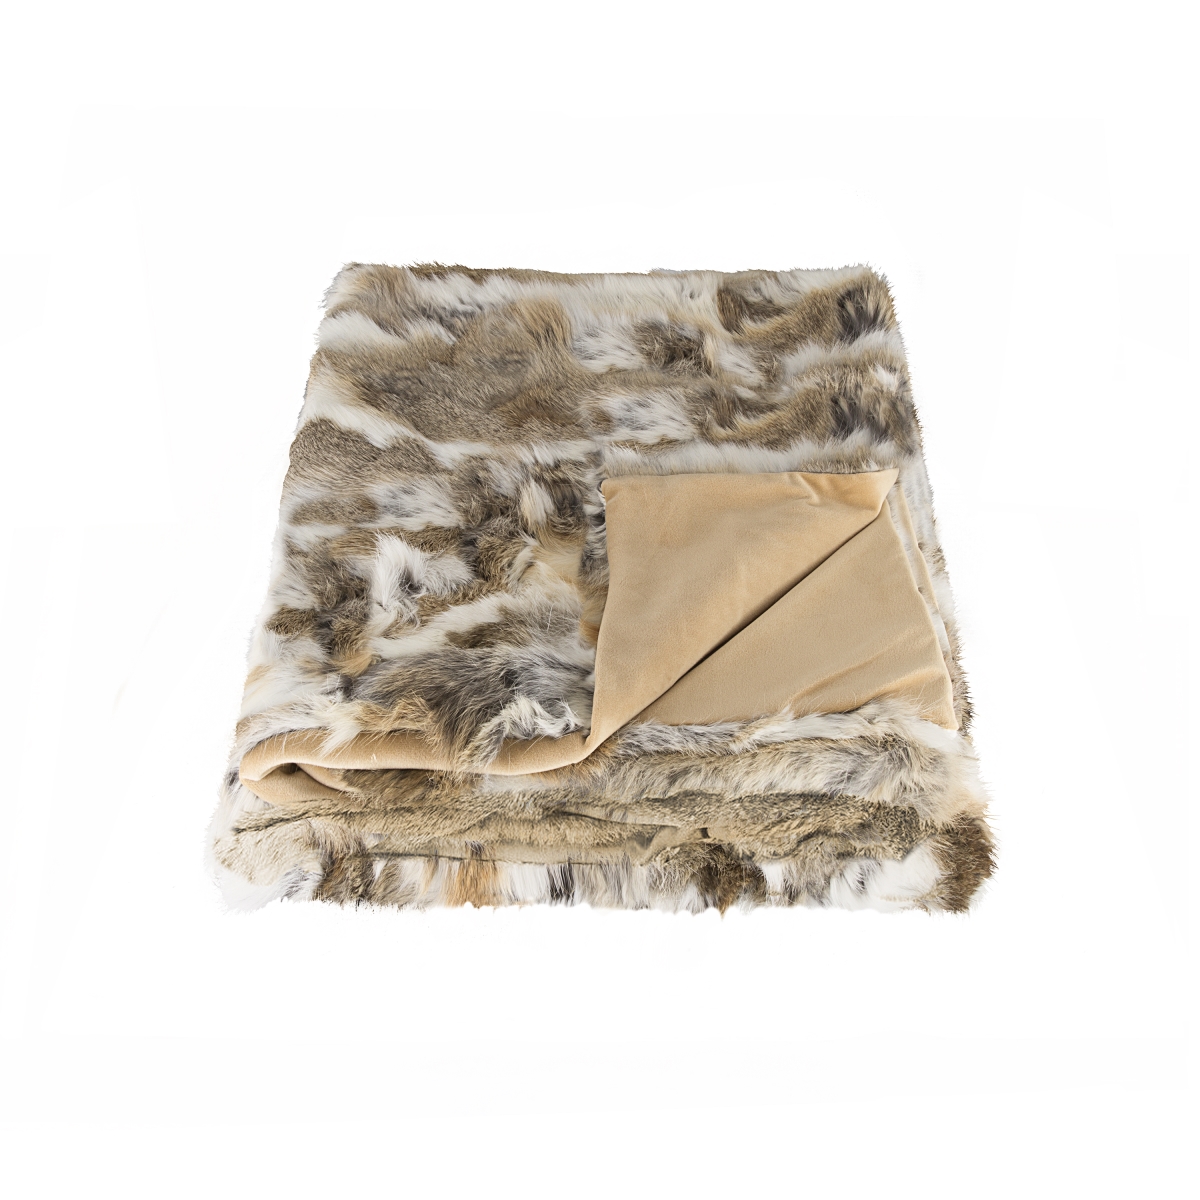 Picture of Natural 676685047014 50 x 60 in. Rabbit Fur Throw Blanket - Tan & White